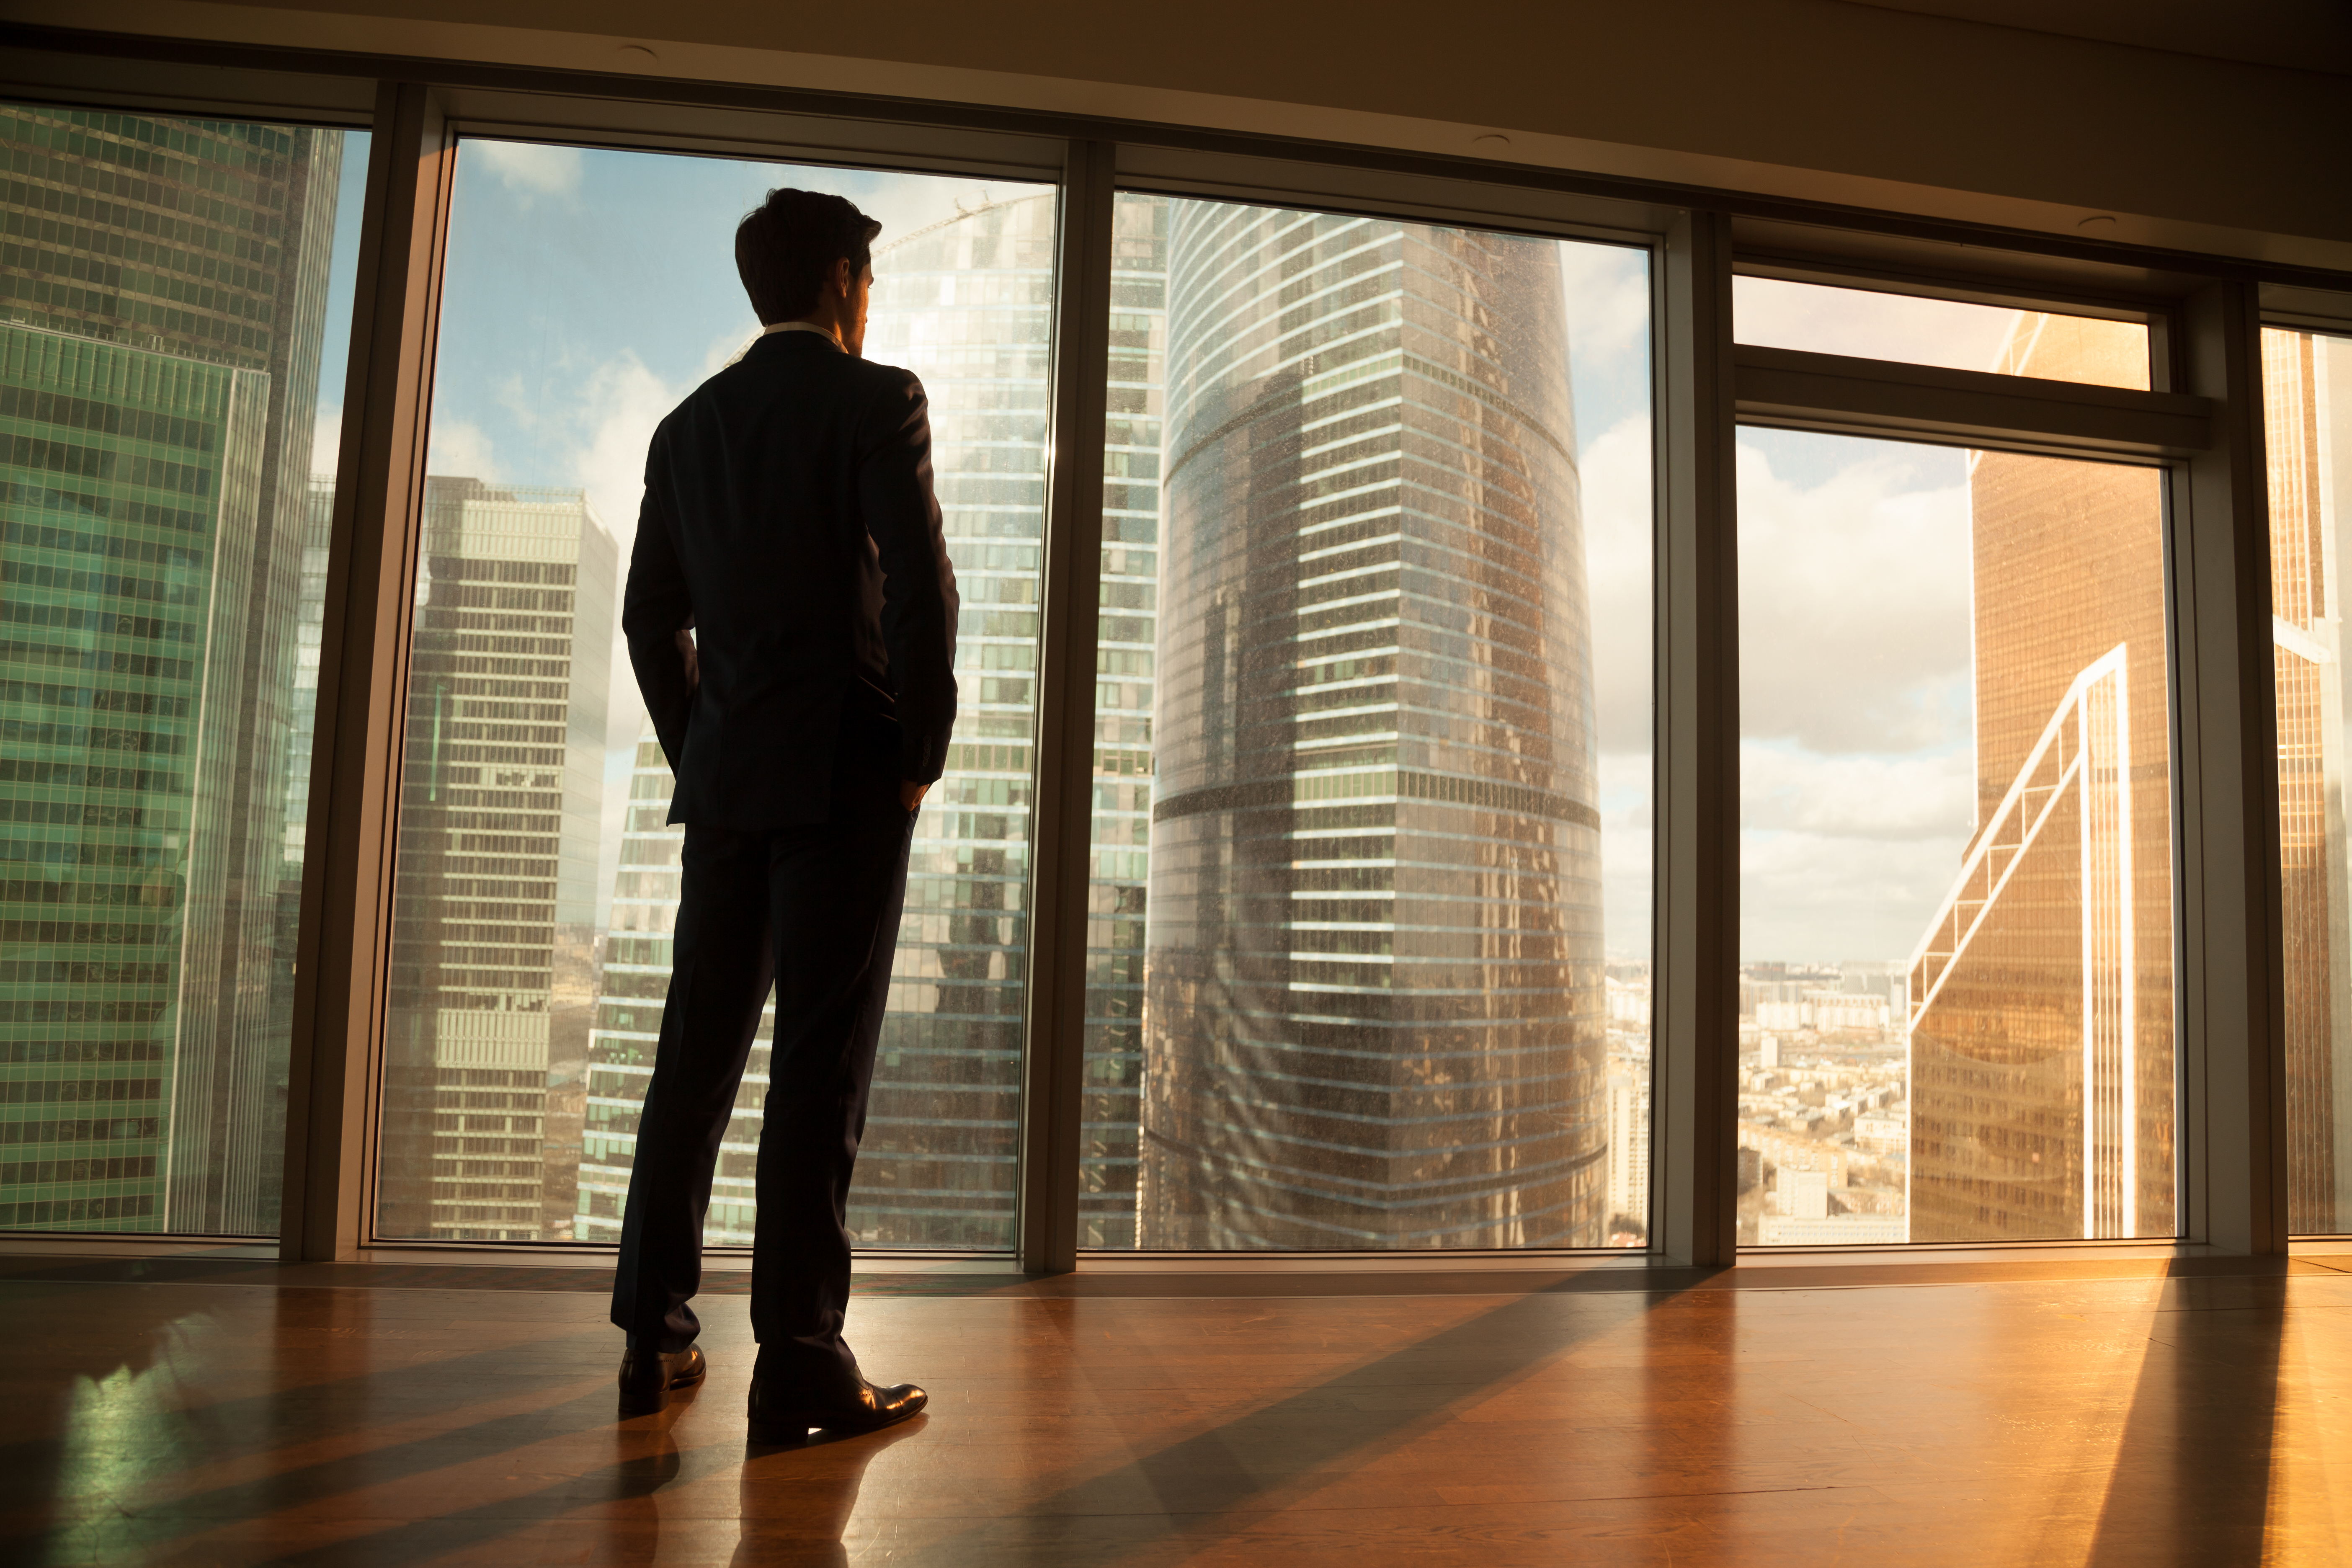 A man standing in an empty office space | Source: Shutterstock